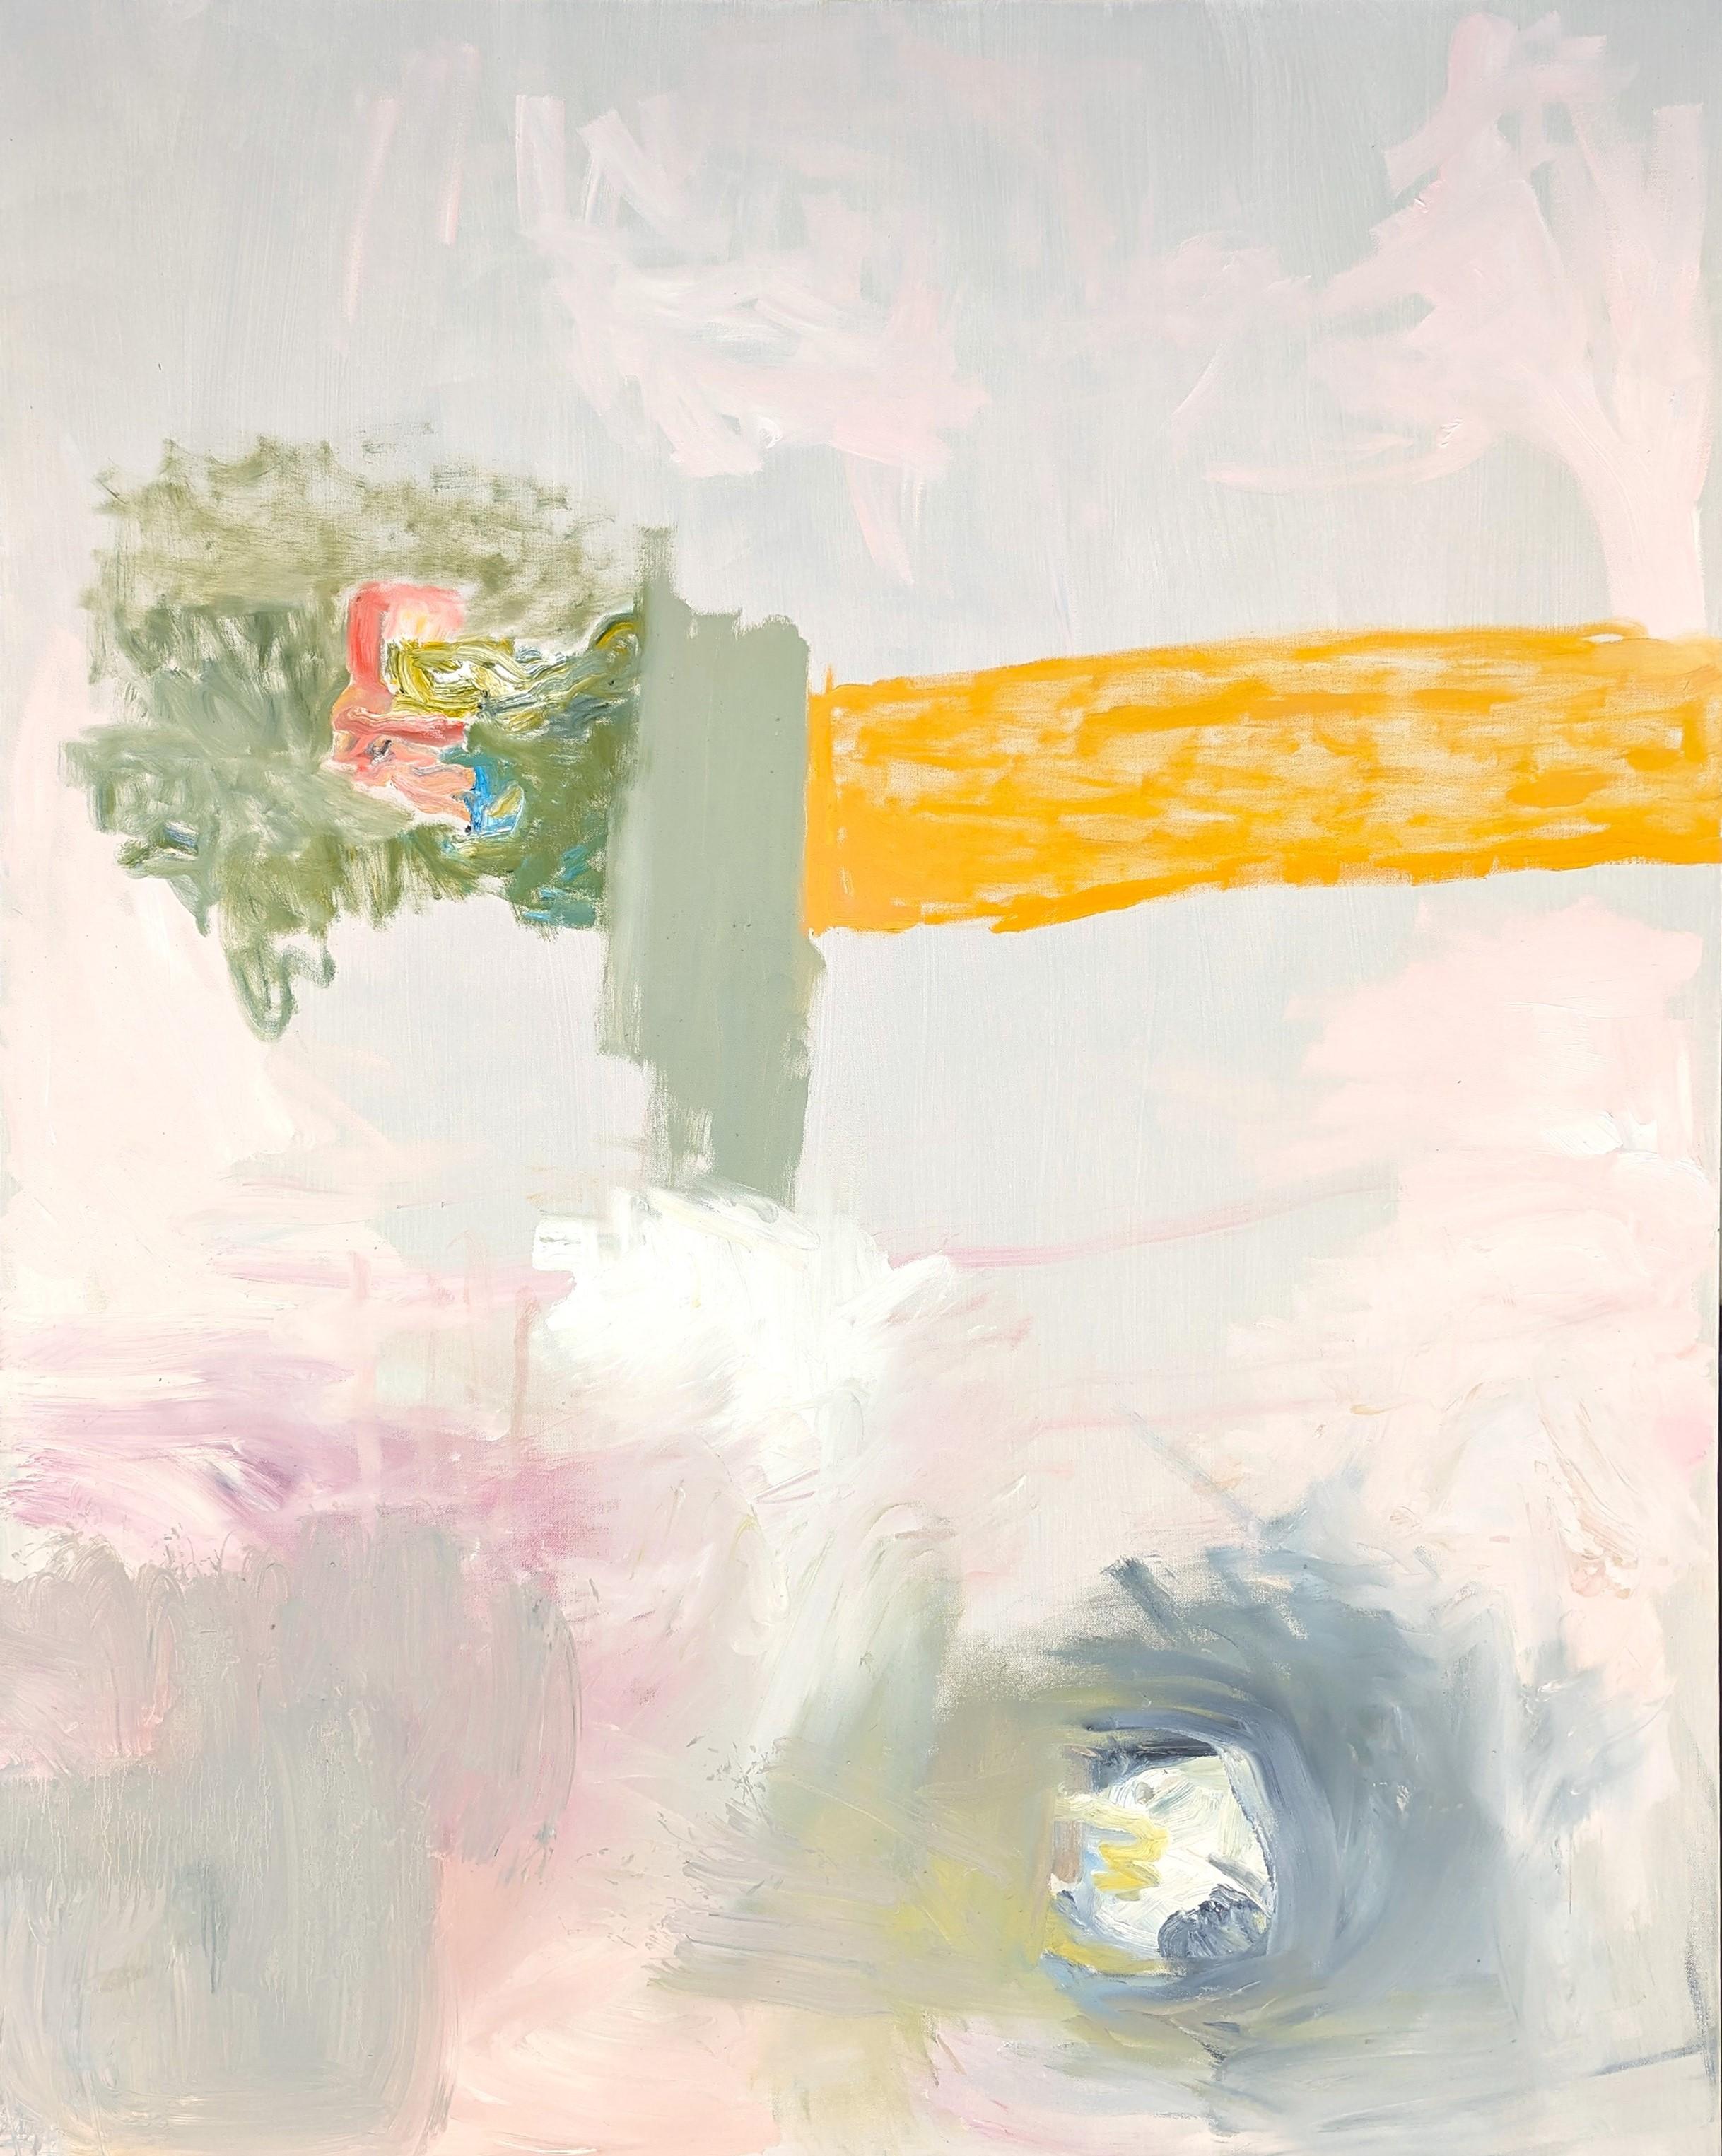 Benji Stiles Abstract Painting - "Yellow Bar" Contemporary Pastel Abstract Expressionist Oil Painting